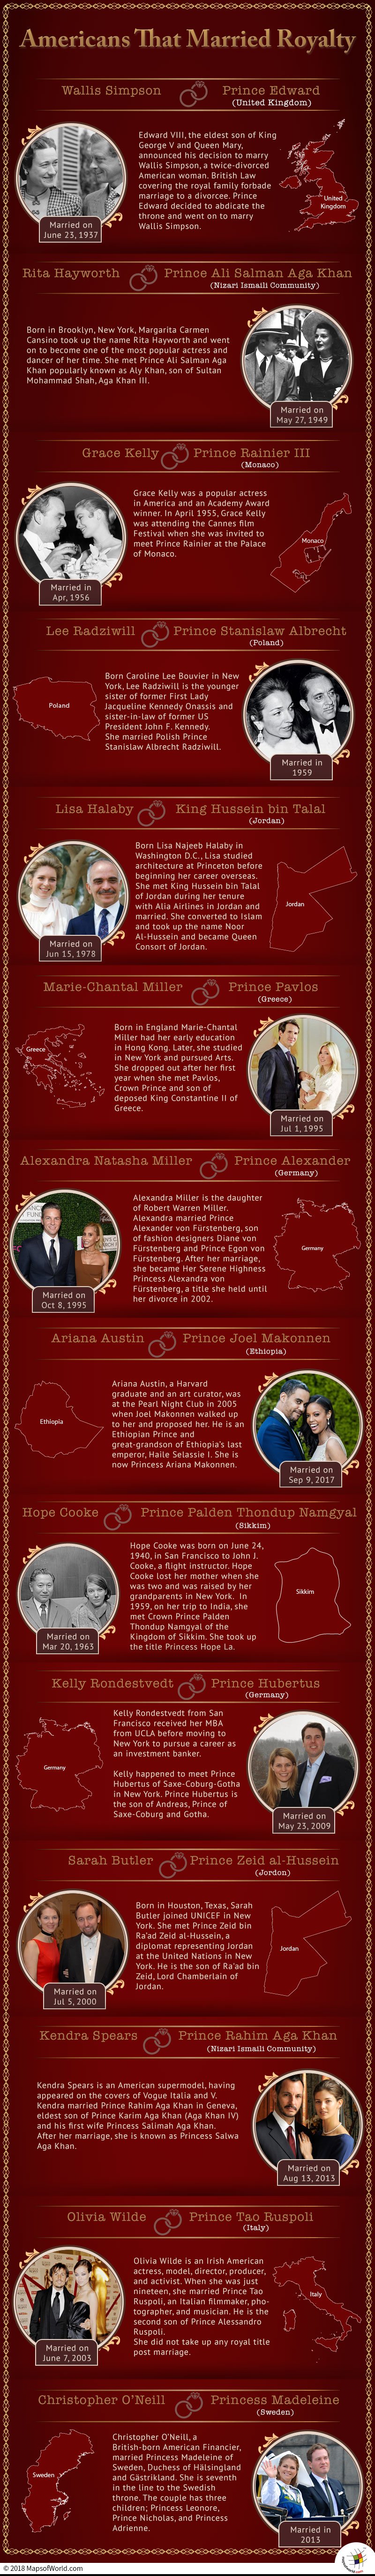 Infographic - Americans that married royalty